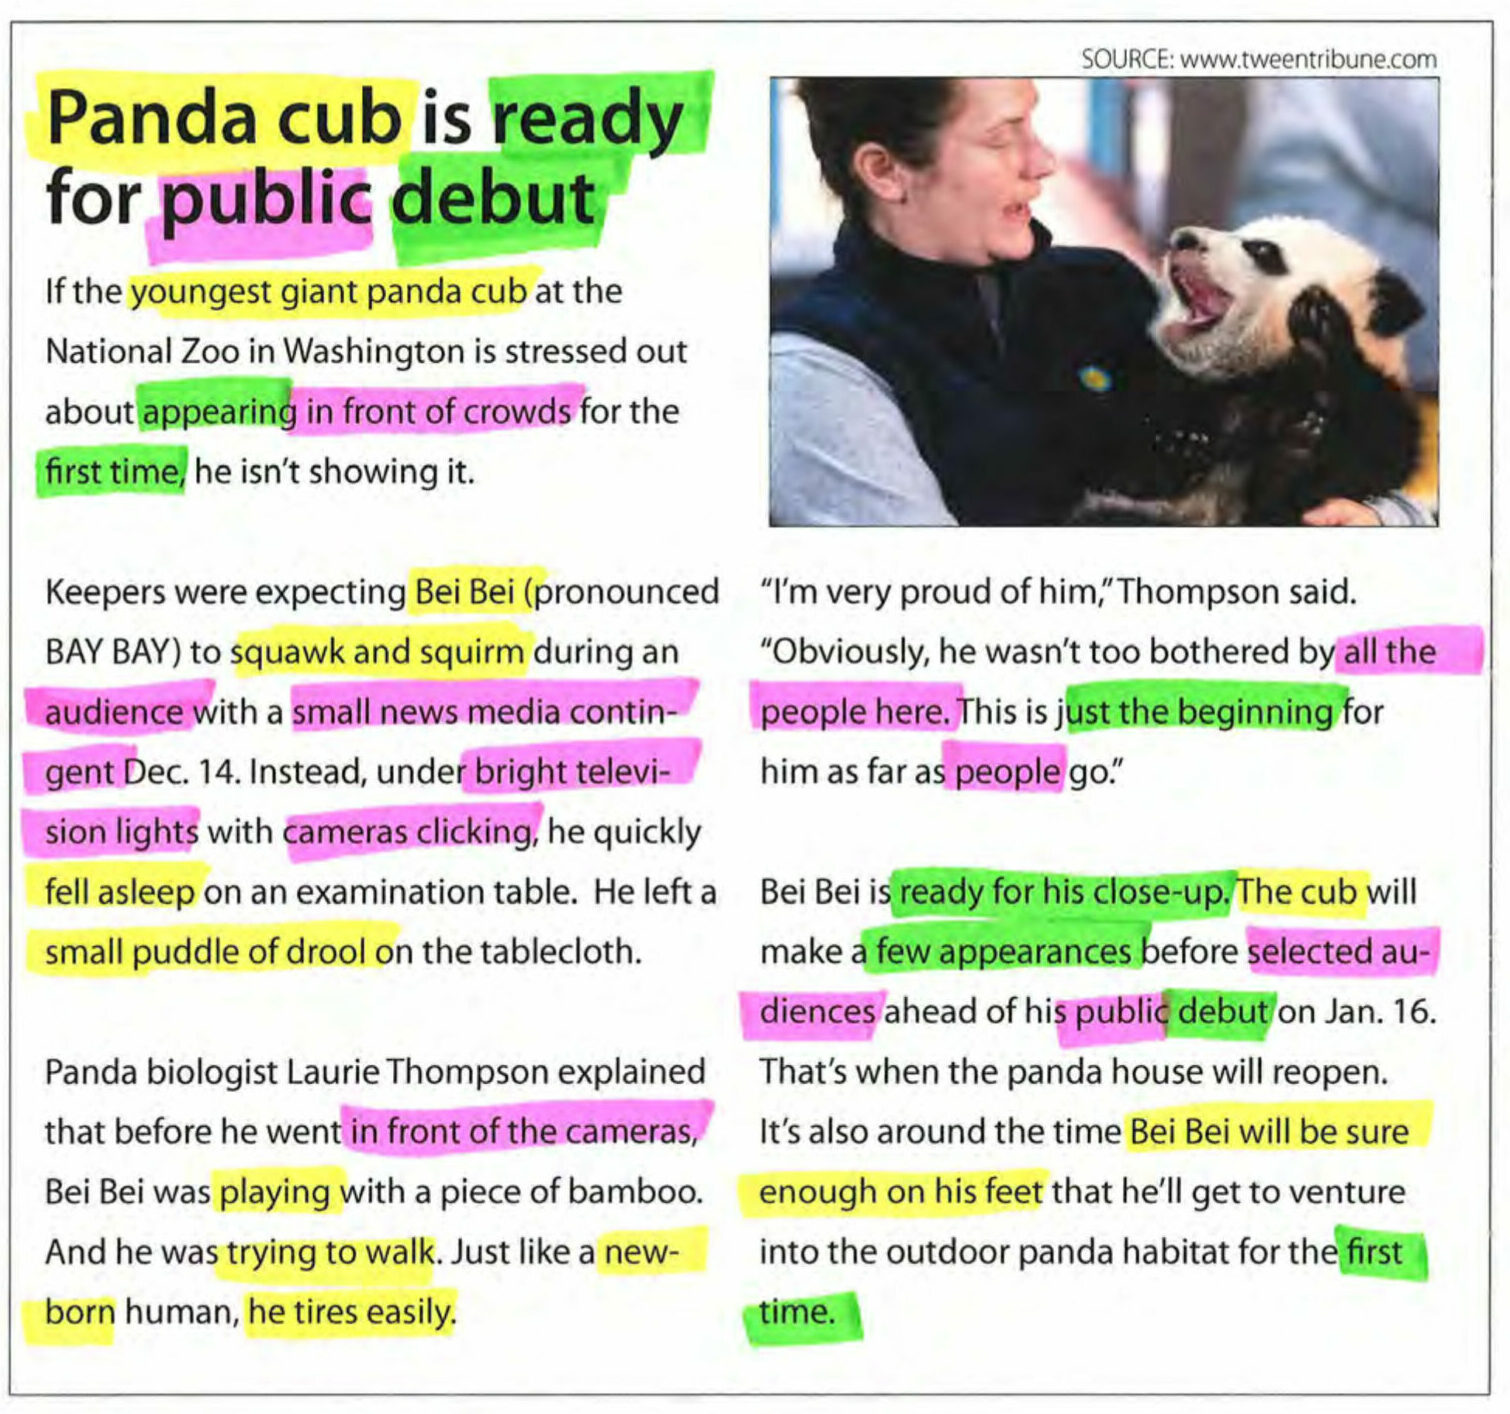 Panda Cub Article with highlights to point to main idea